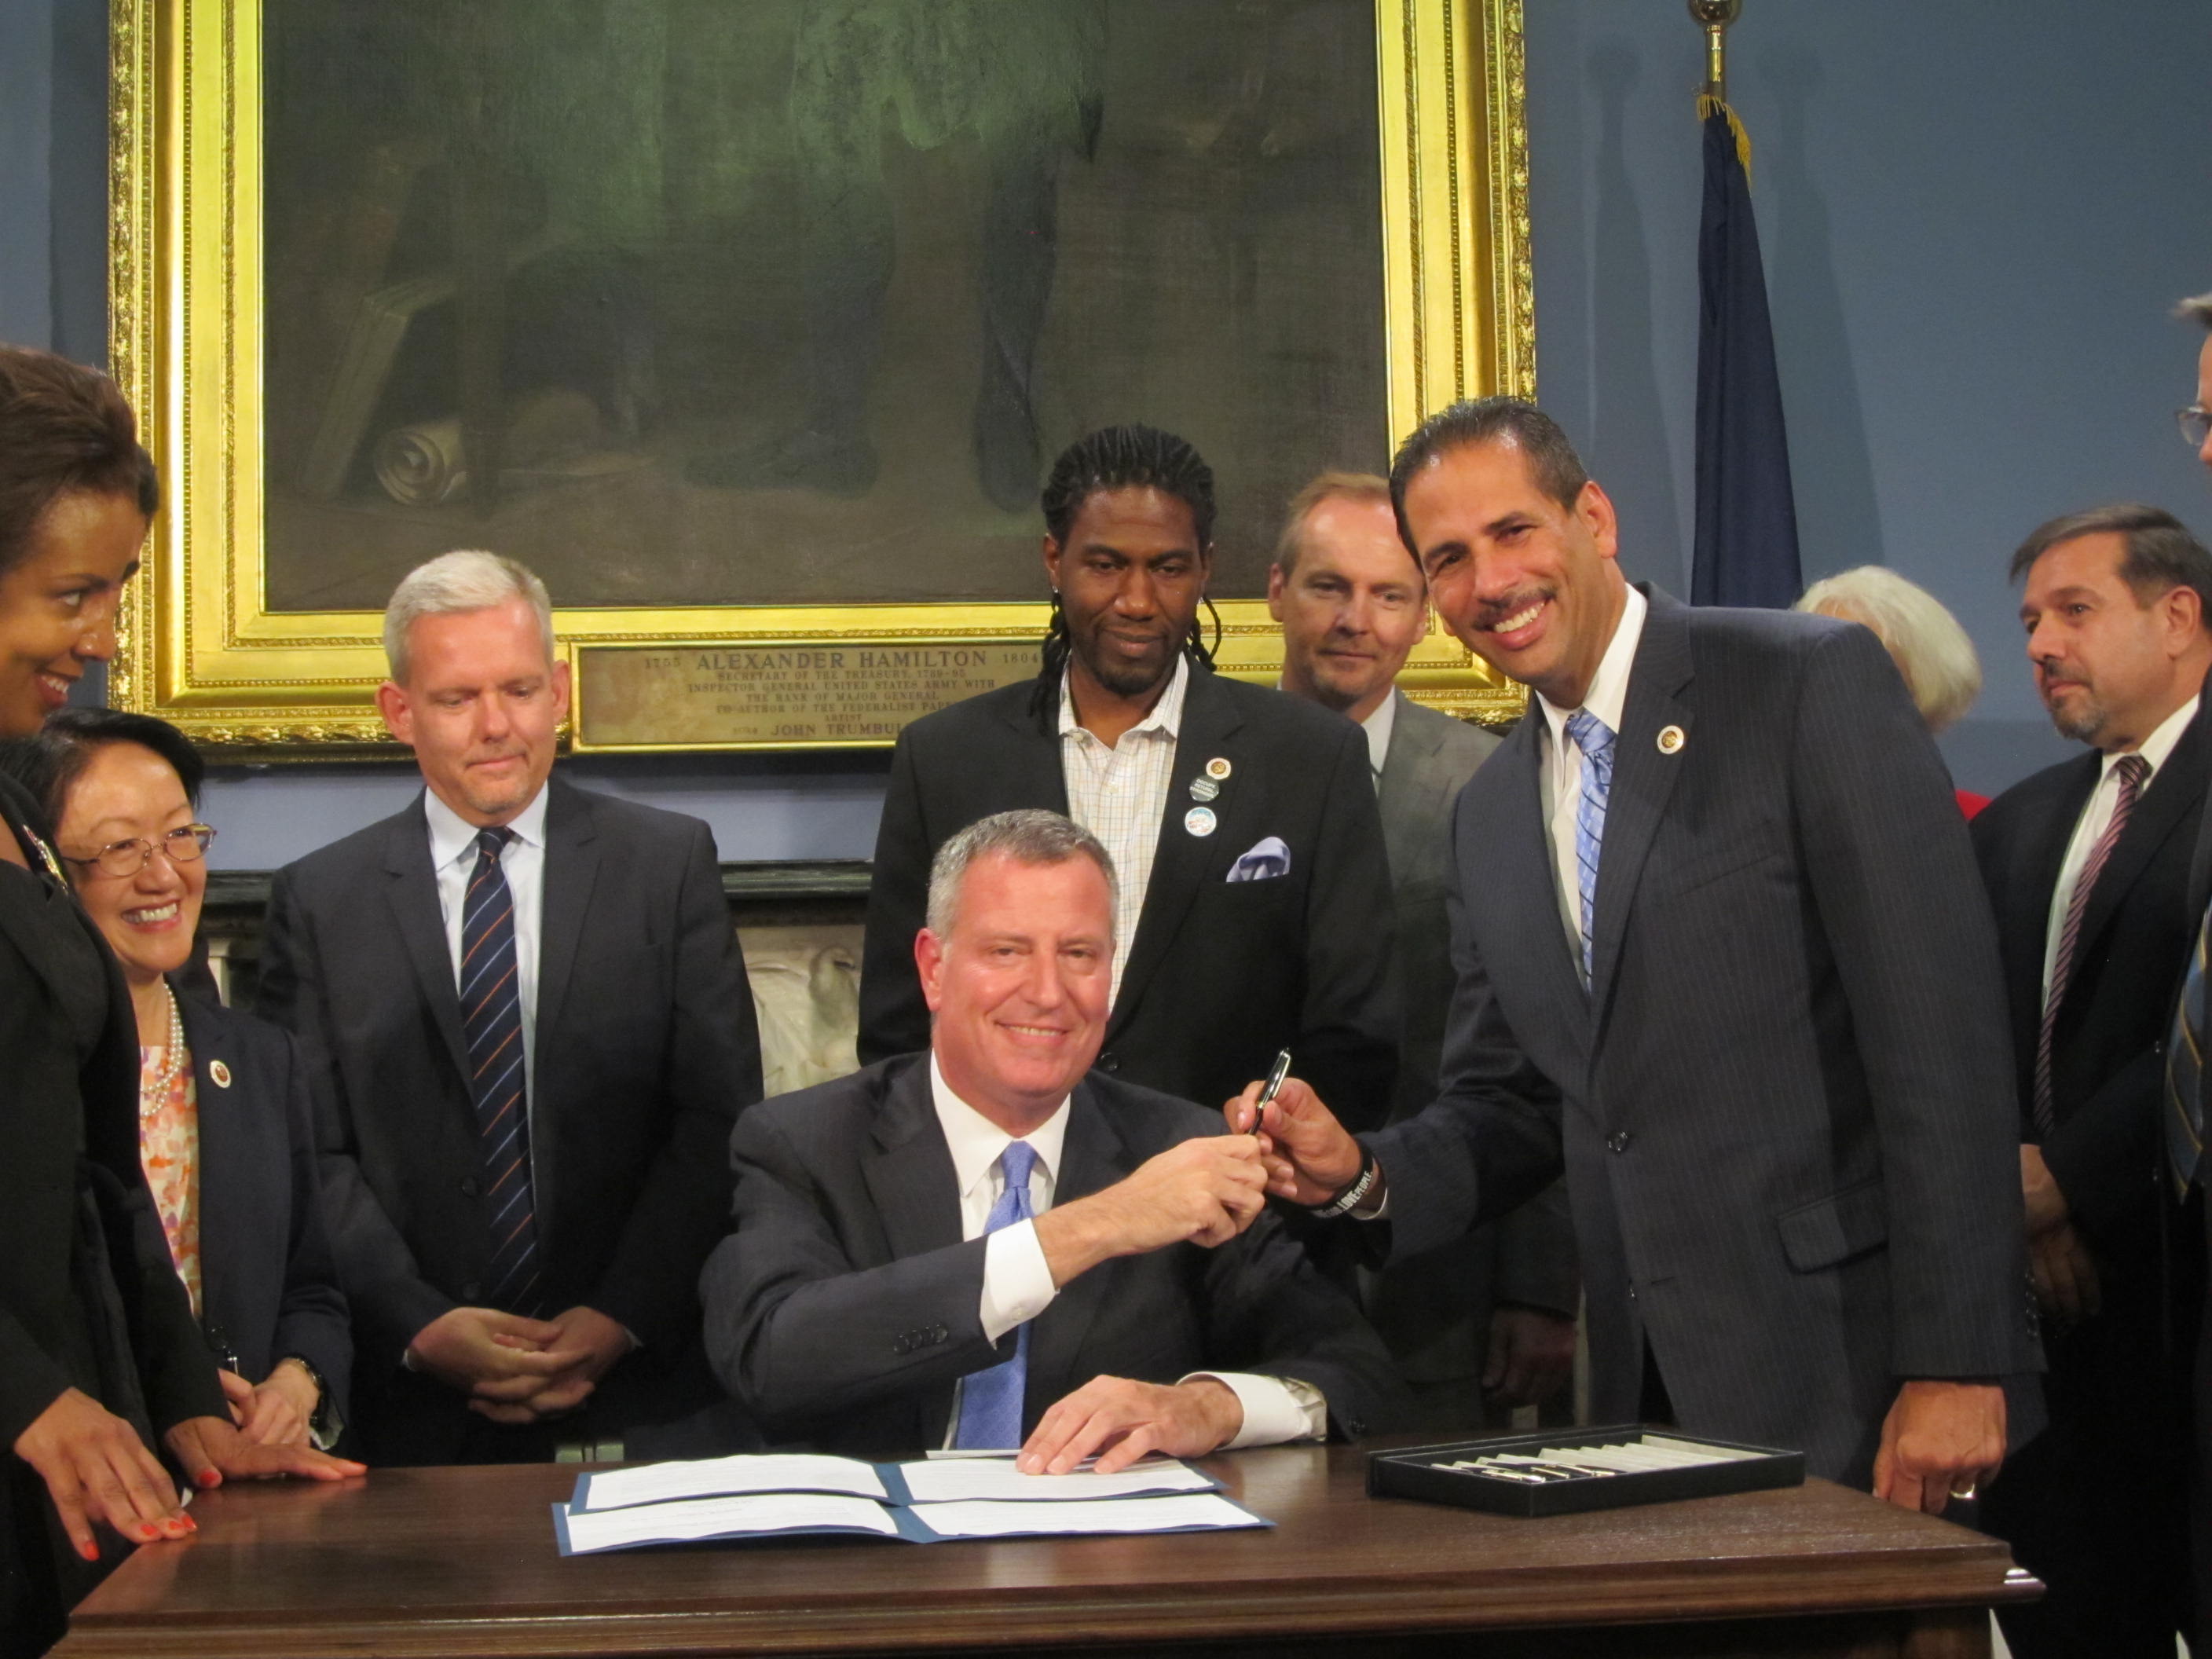 The Tenants Bill of Rights is signed into law.  (l to r) Council Member Margaret Chin, Council Member Jimmy Van Bramer, Mayor Bill de Blasio, Council Member Jumaane D. Williams, and Council Member Fernando Cabrera.  Image credit:  Office of Council Member Fernando Cabrera